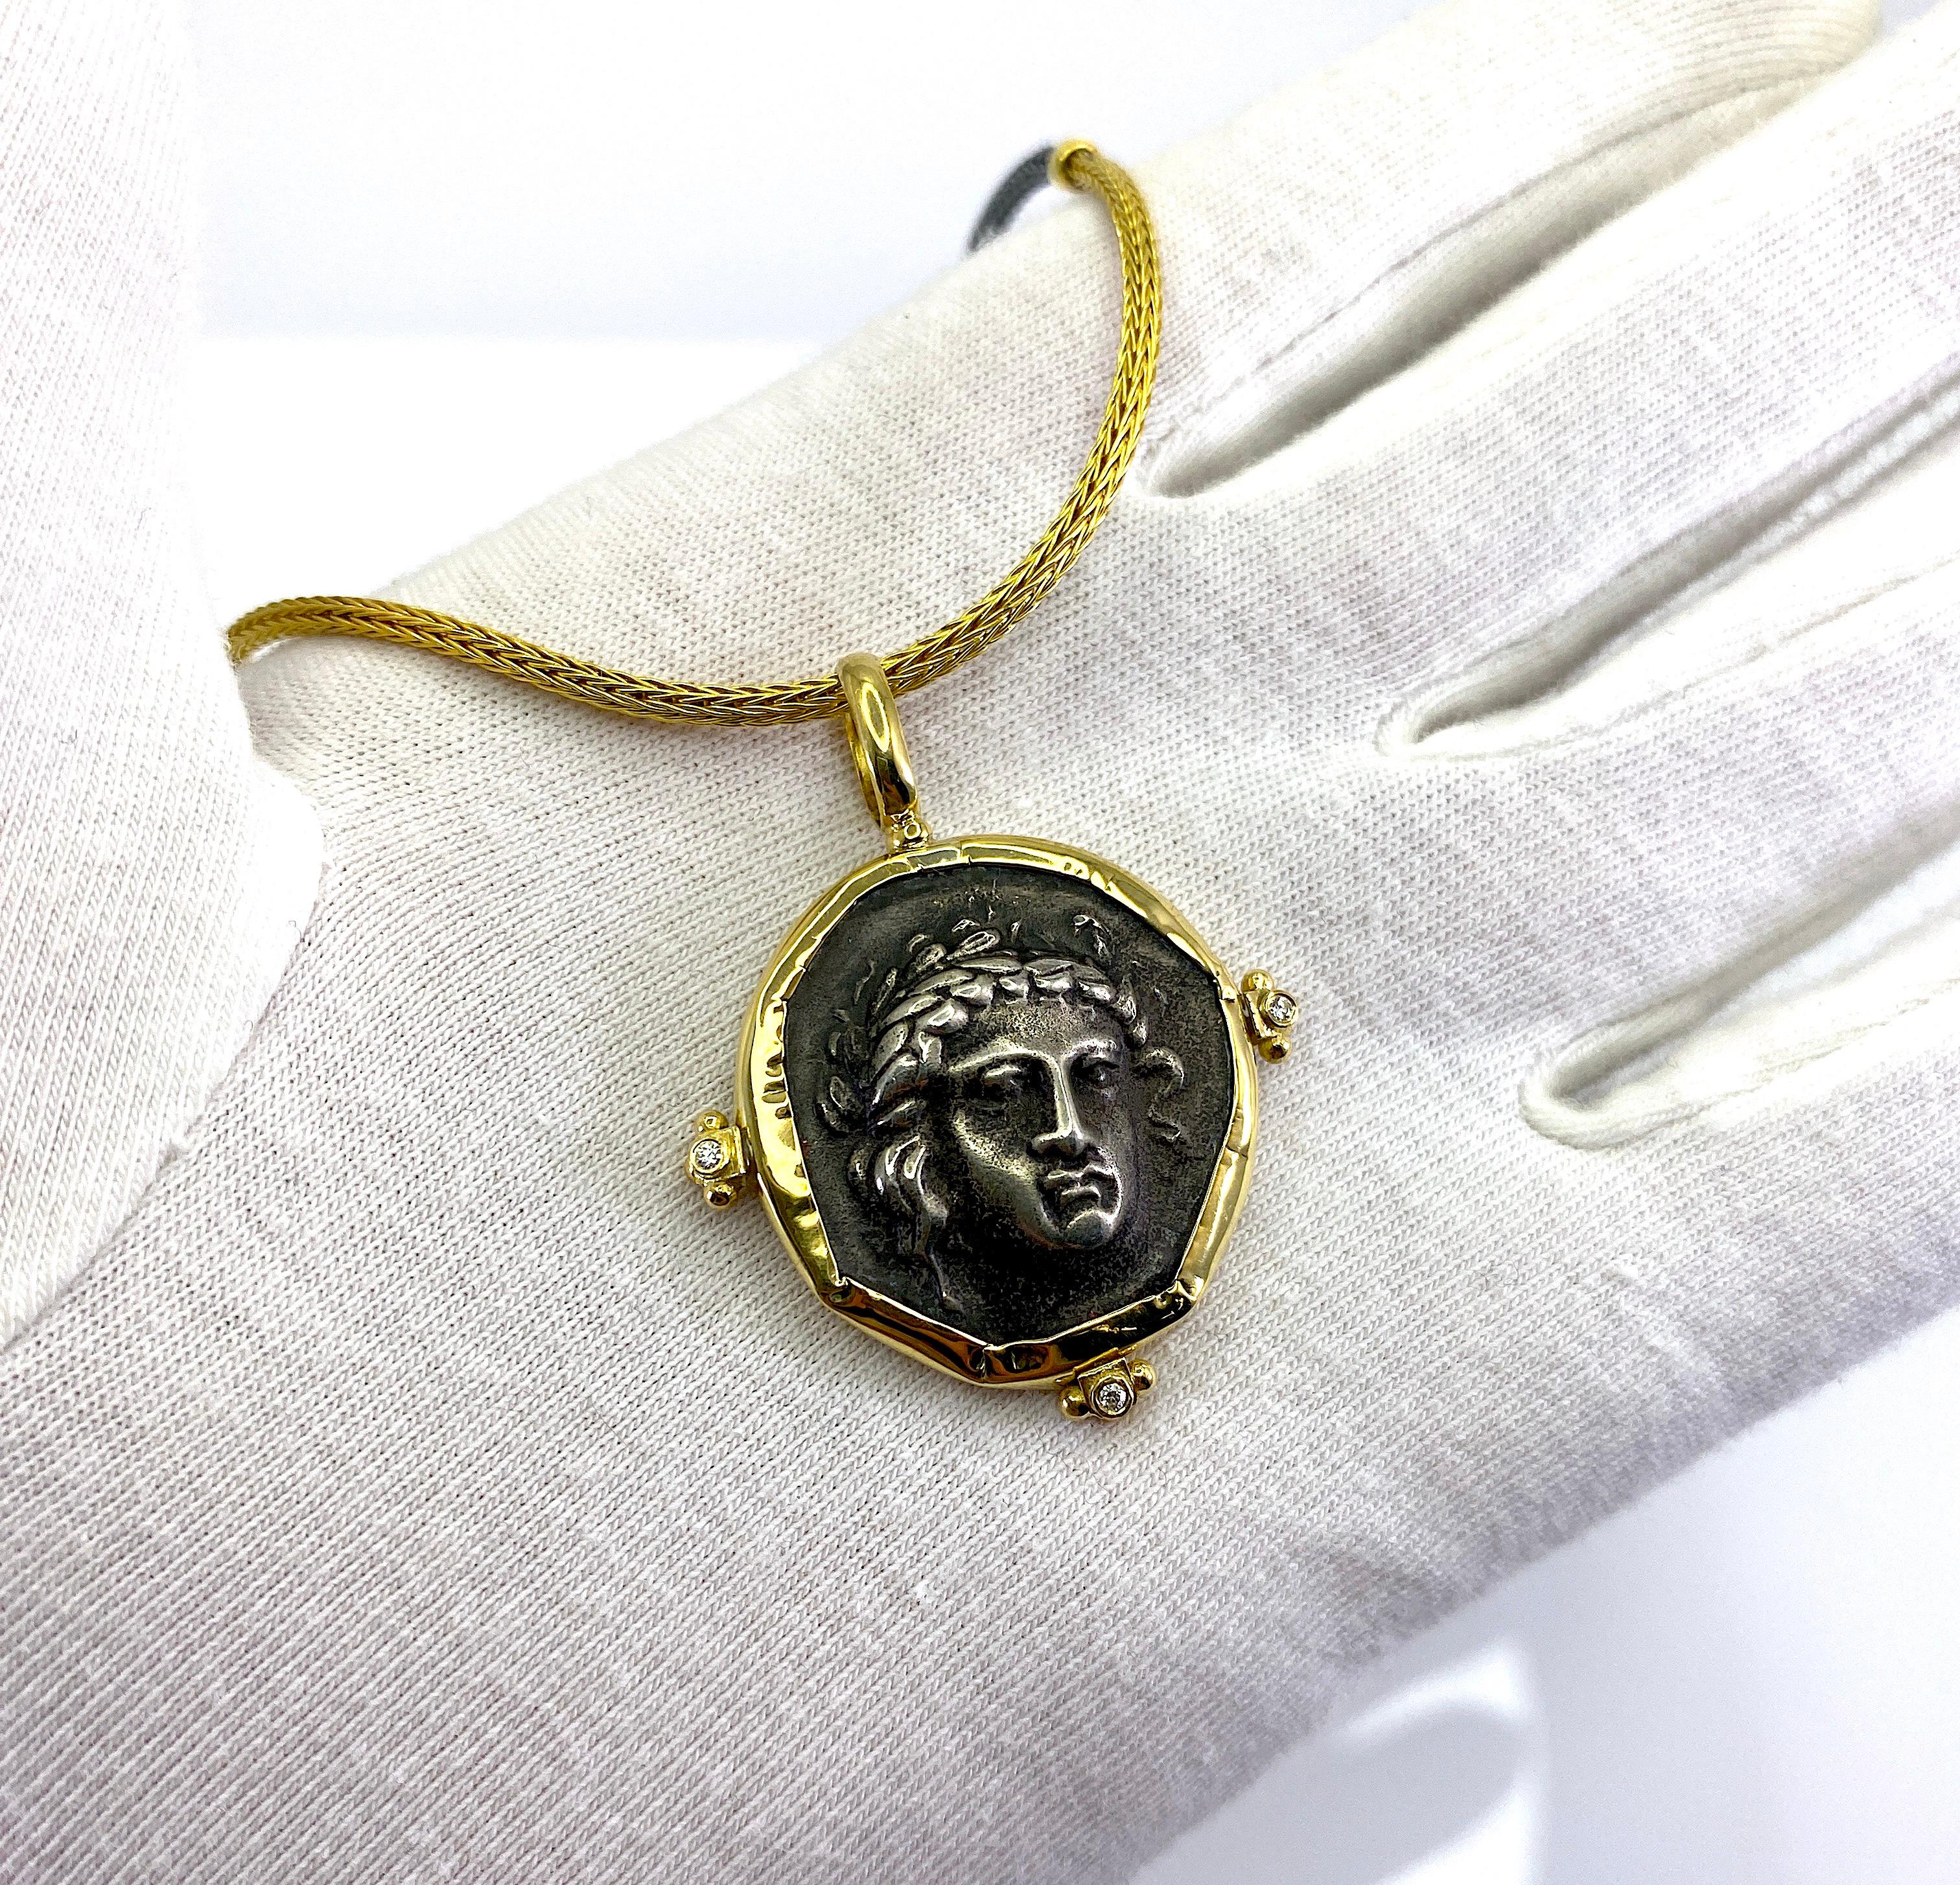 S.Georgios designer 18 Karat Yellow Gold handmade Pendant Necklace featuring a replica of an Ancient Greek Apollon Coin in Silver 925. The rim and hook of the pendant are solid 18 Karat Gold decorated with granulation work and 0.03 Carats of White